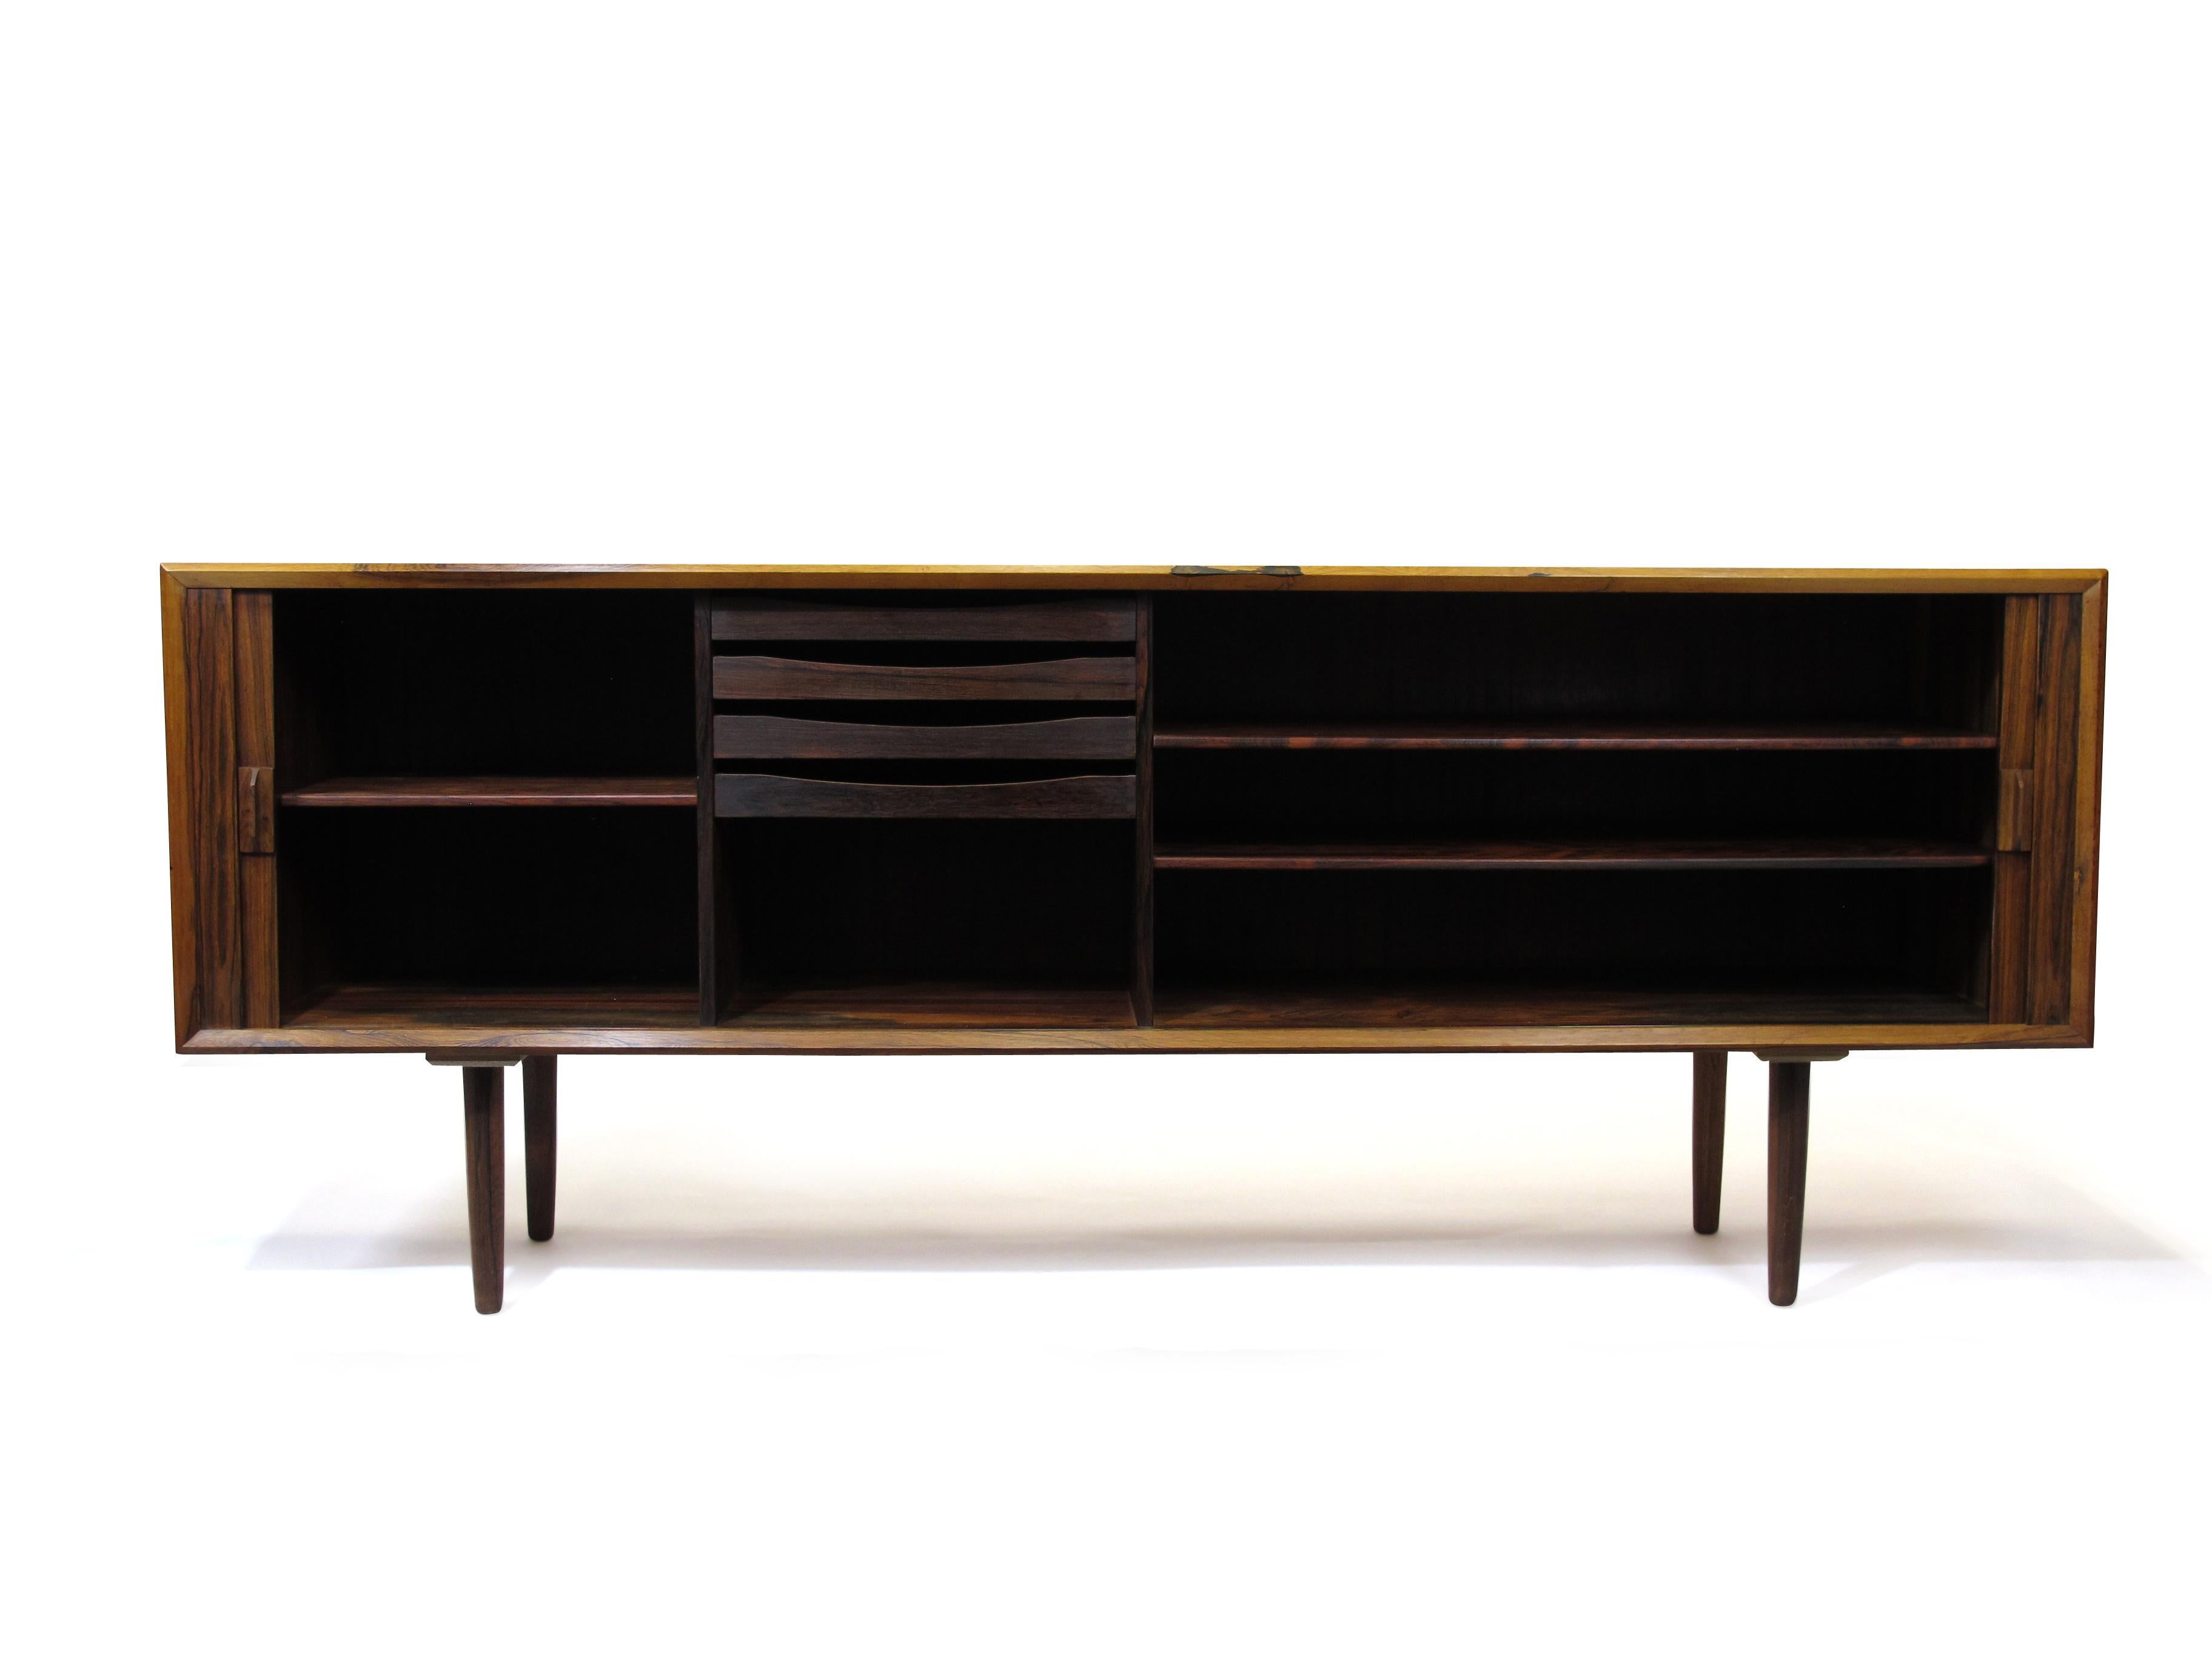 Rosewood credenza designed by Arne Vodder for Sibast, Denmark circa 1961. Features a book-matched tambour door front, which opens to reveal a series of adjustable shelves and silverware drawers. Raised on round tapered legs and has a finished back.